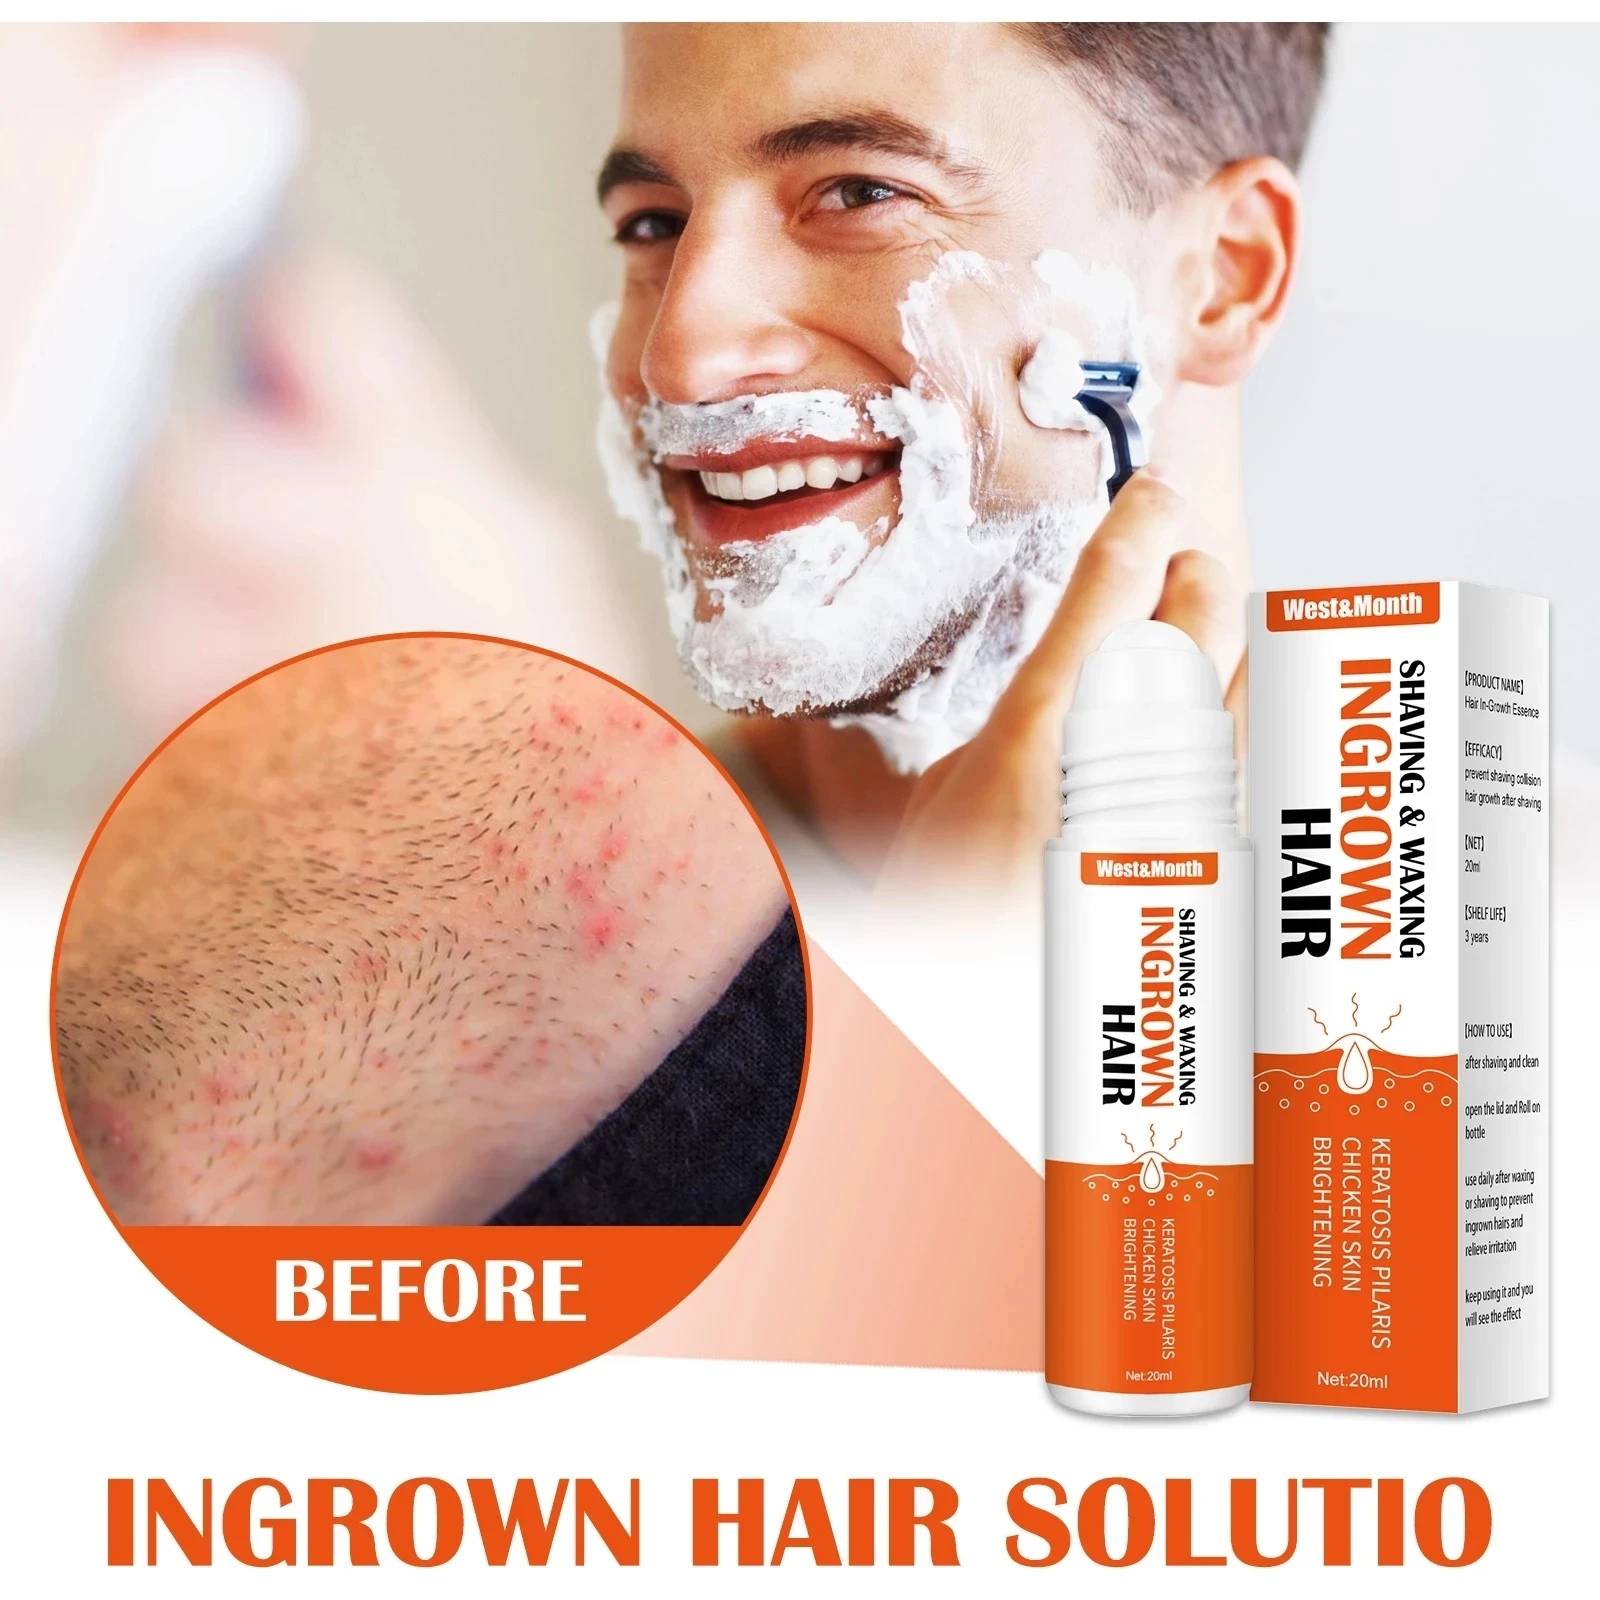 

20ml After Shave Repair Serum Solution Soothes Shaving Waxing Ingrown Hair Reduce Redness Soothes Skin Prevent Razor Bumps